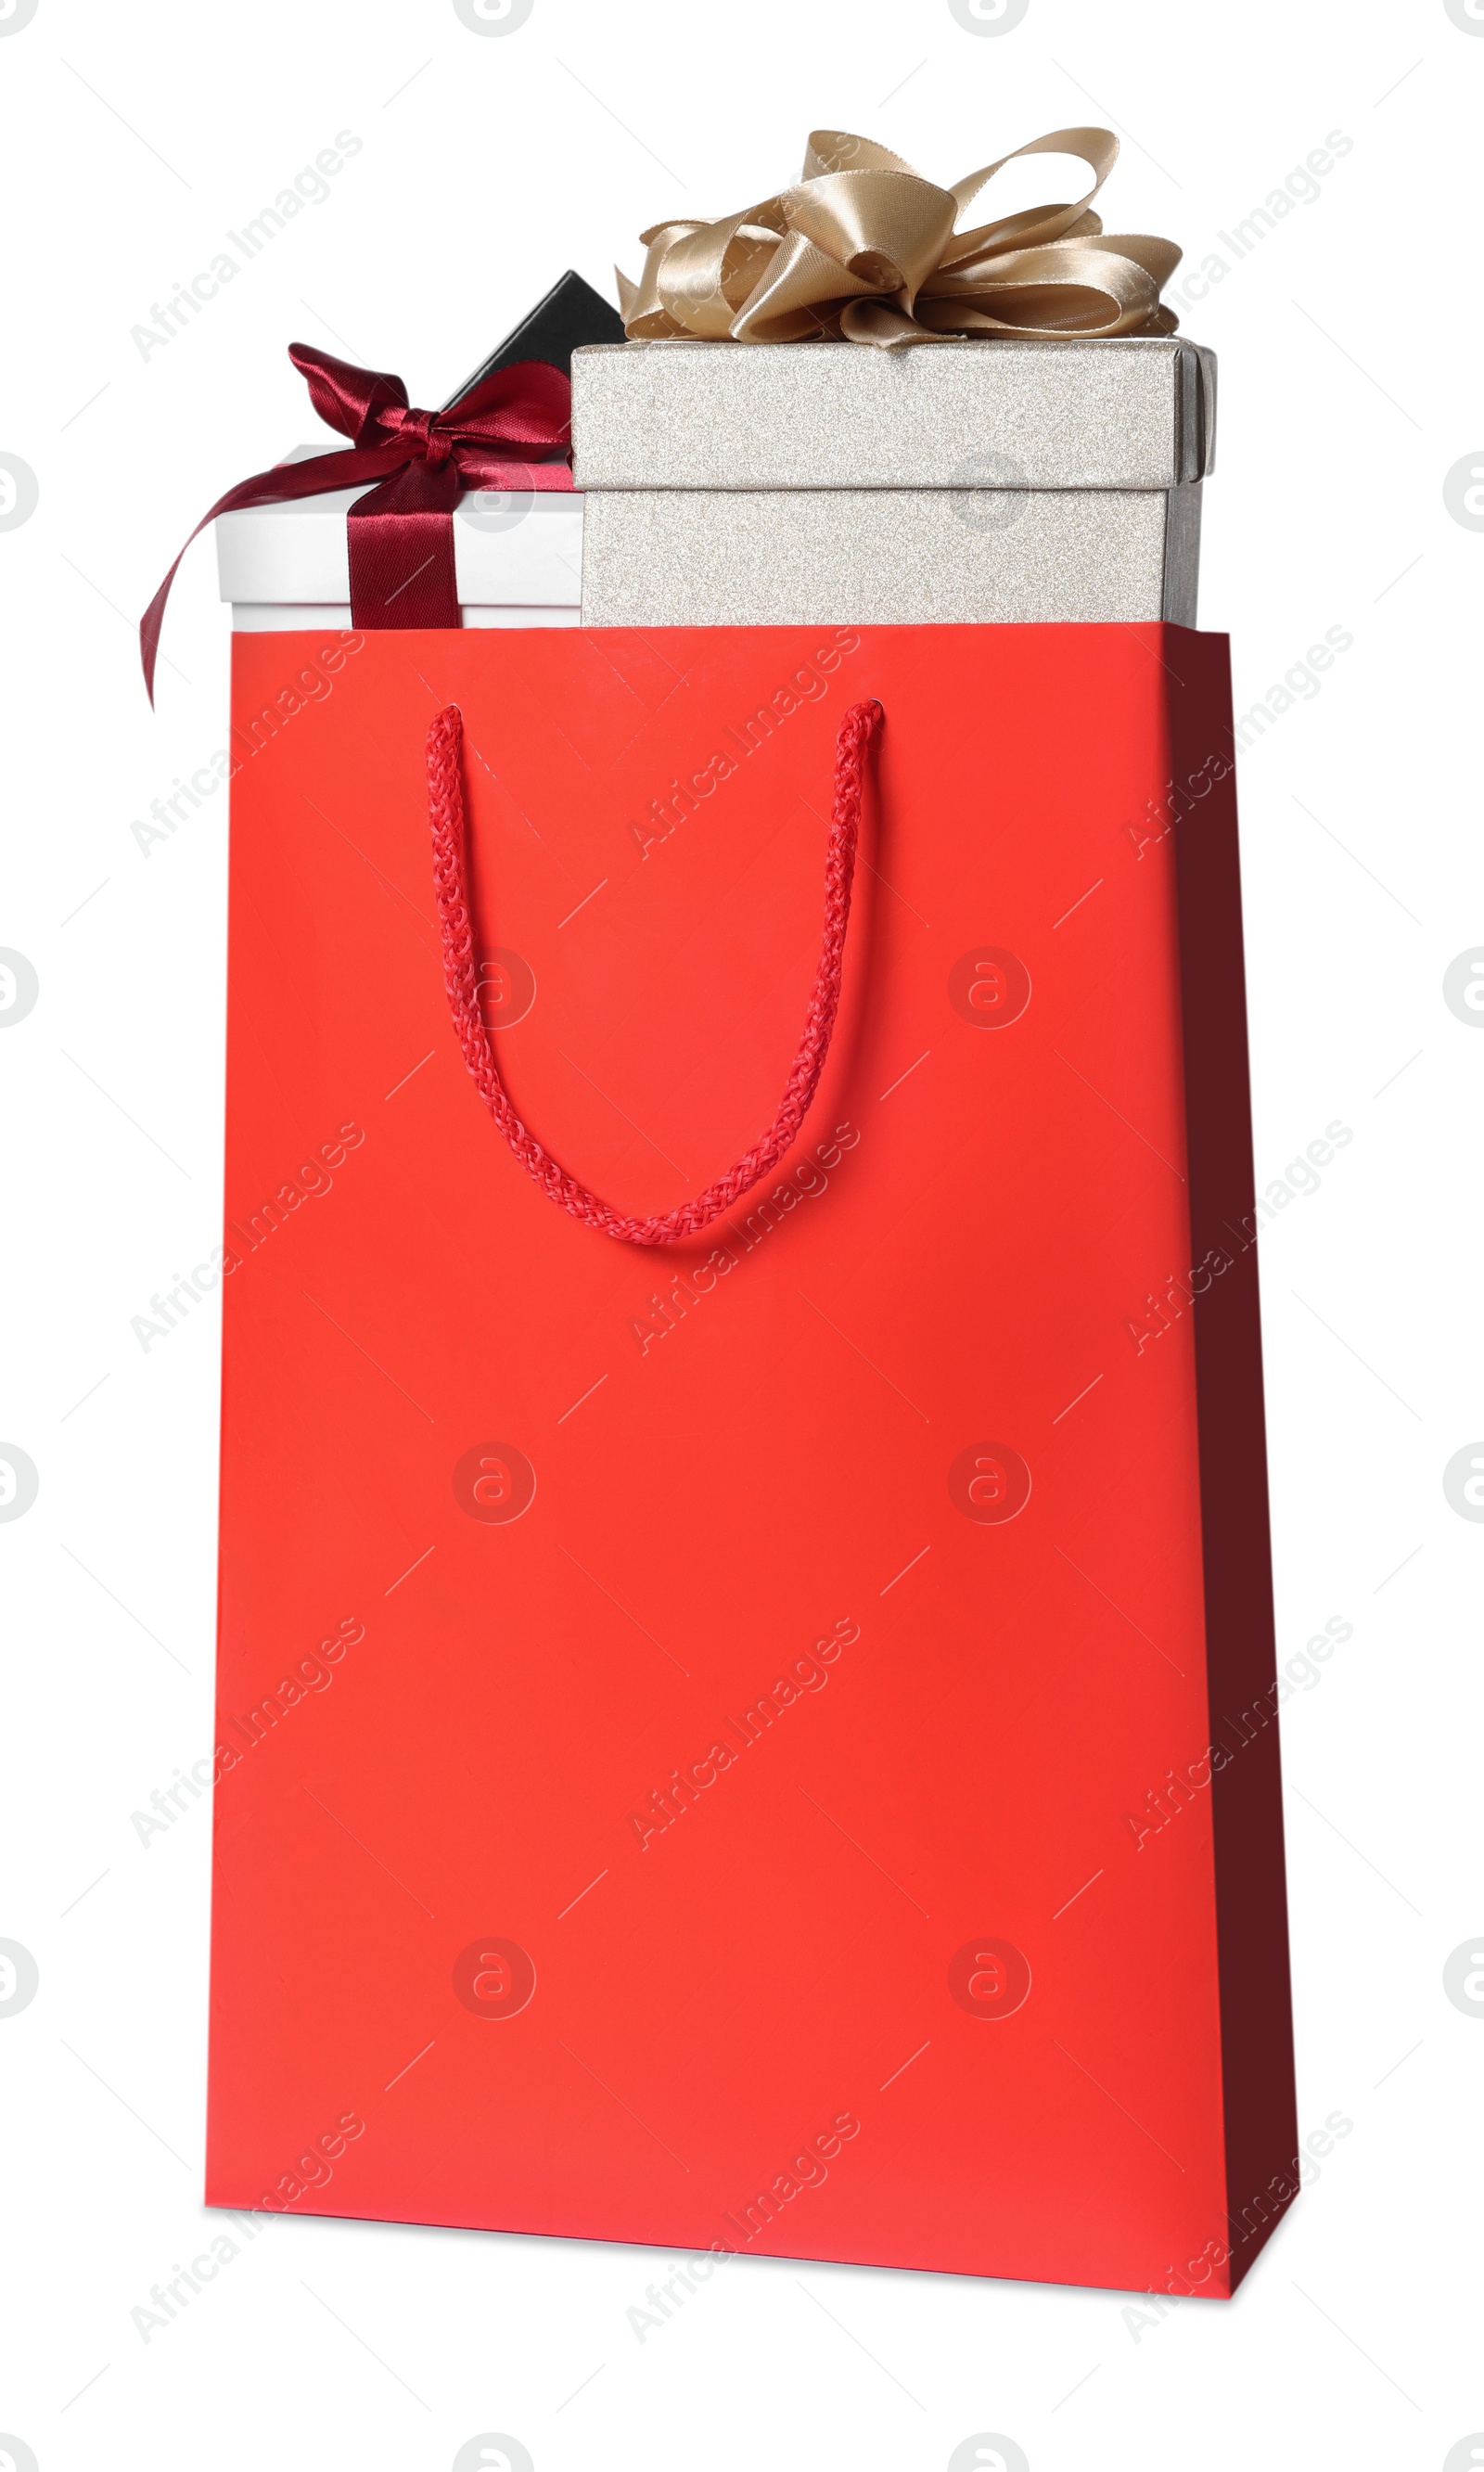 Photo of Red paper shopping bag full of gift boxes on white background